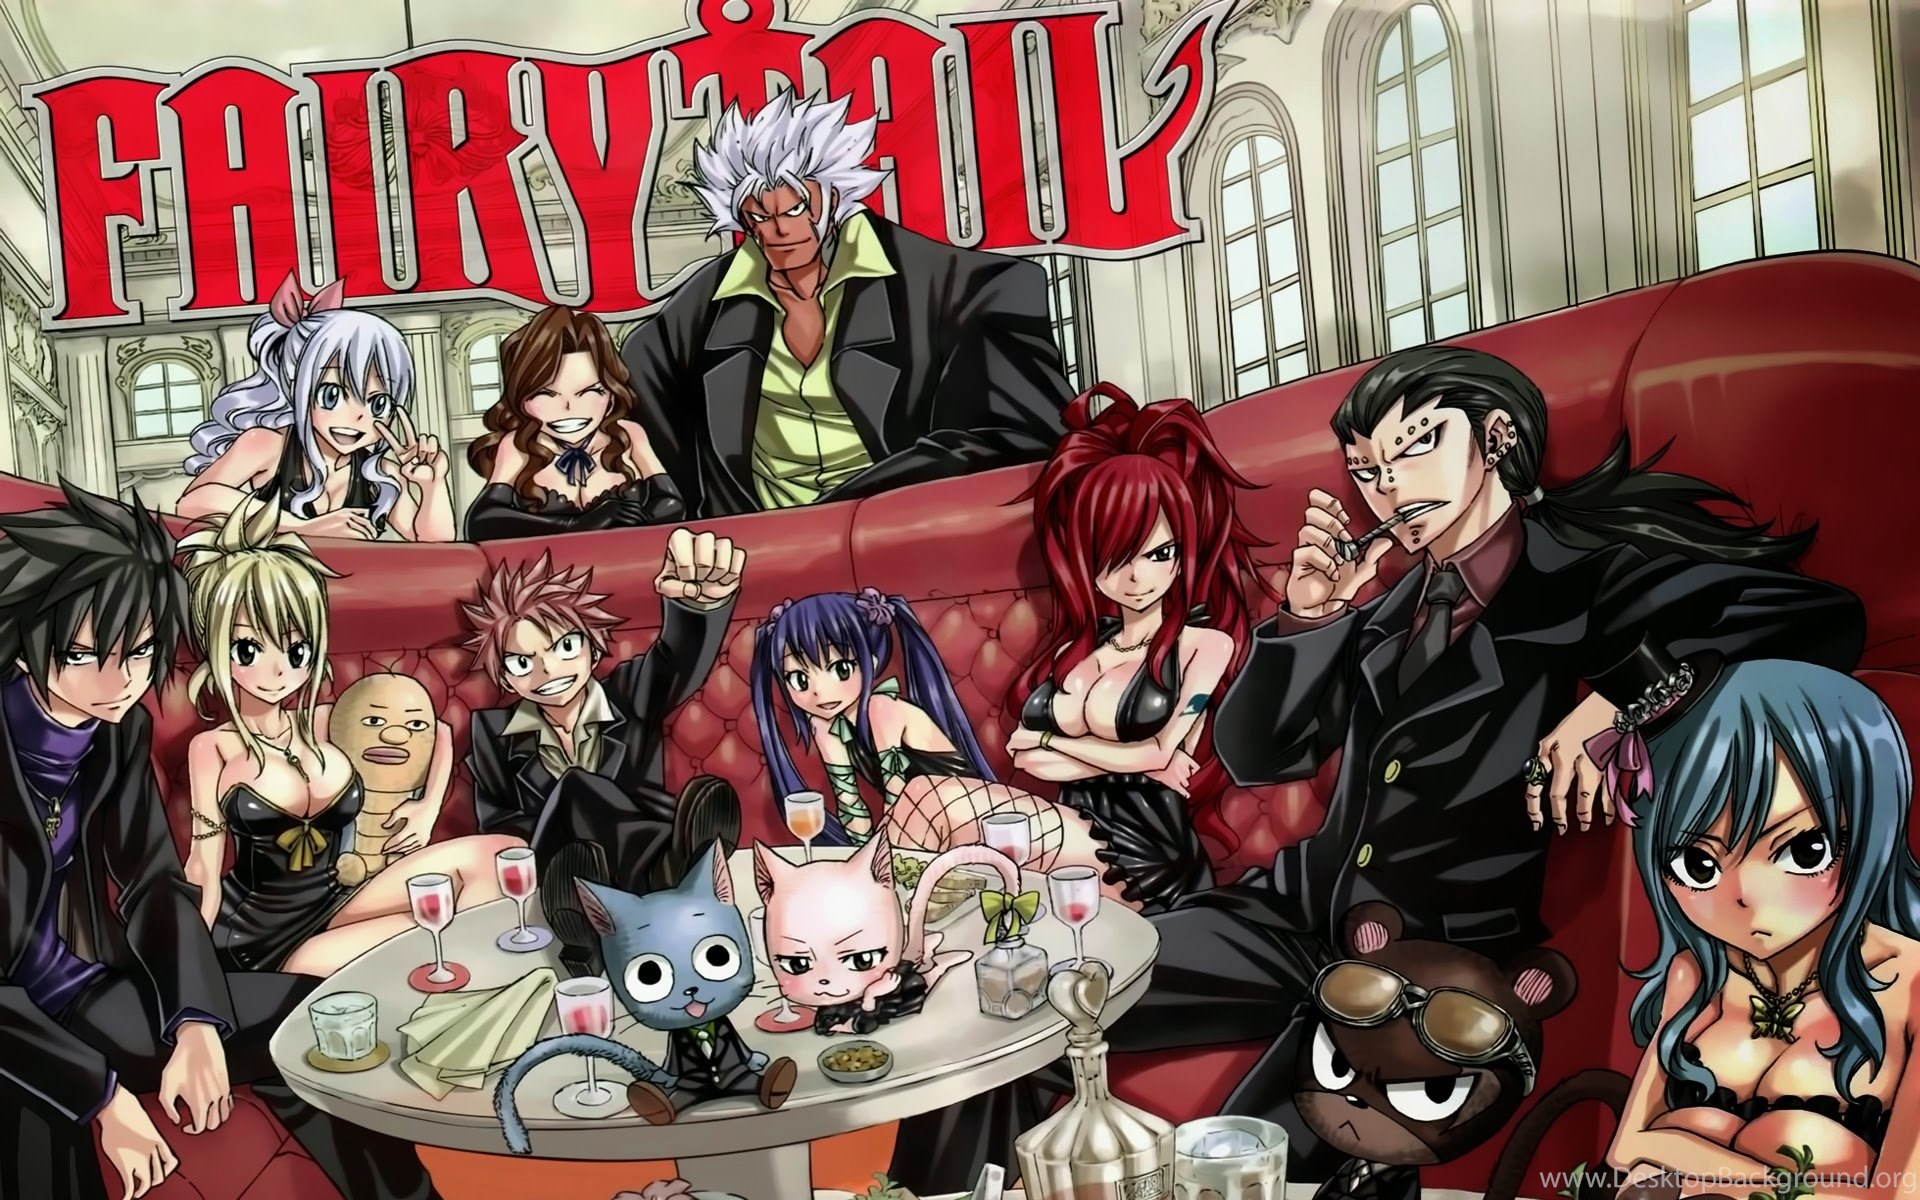 Fairy Tail Guild Wallpapers Desktop Background